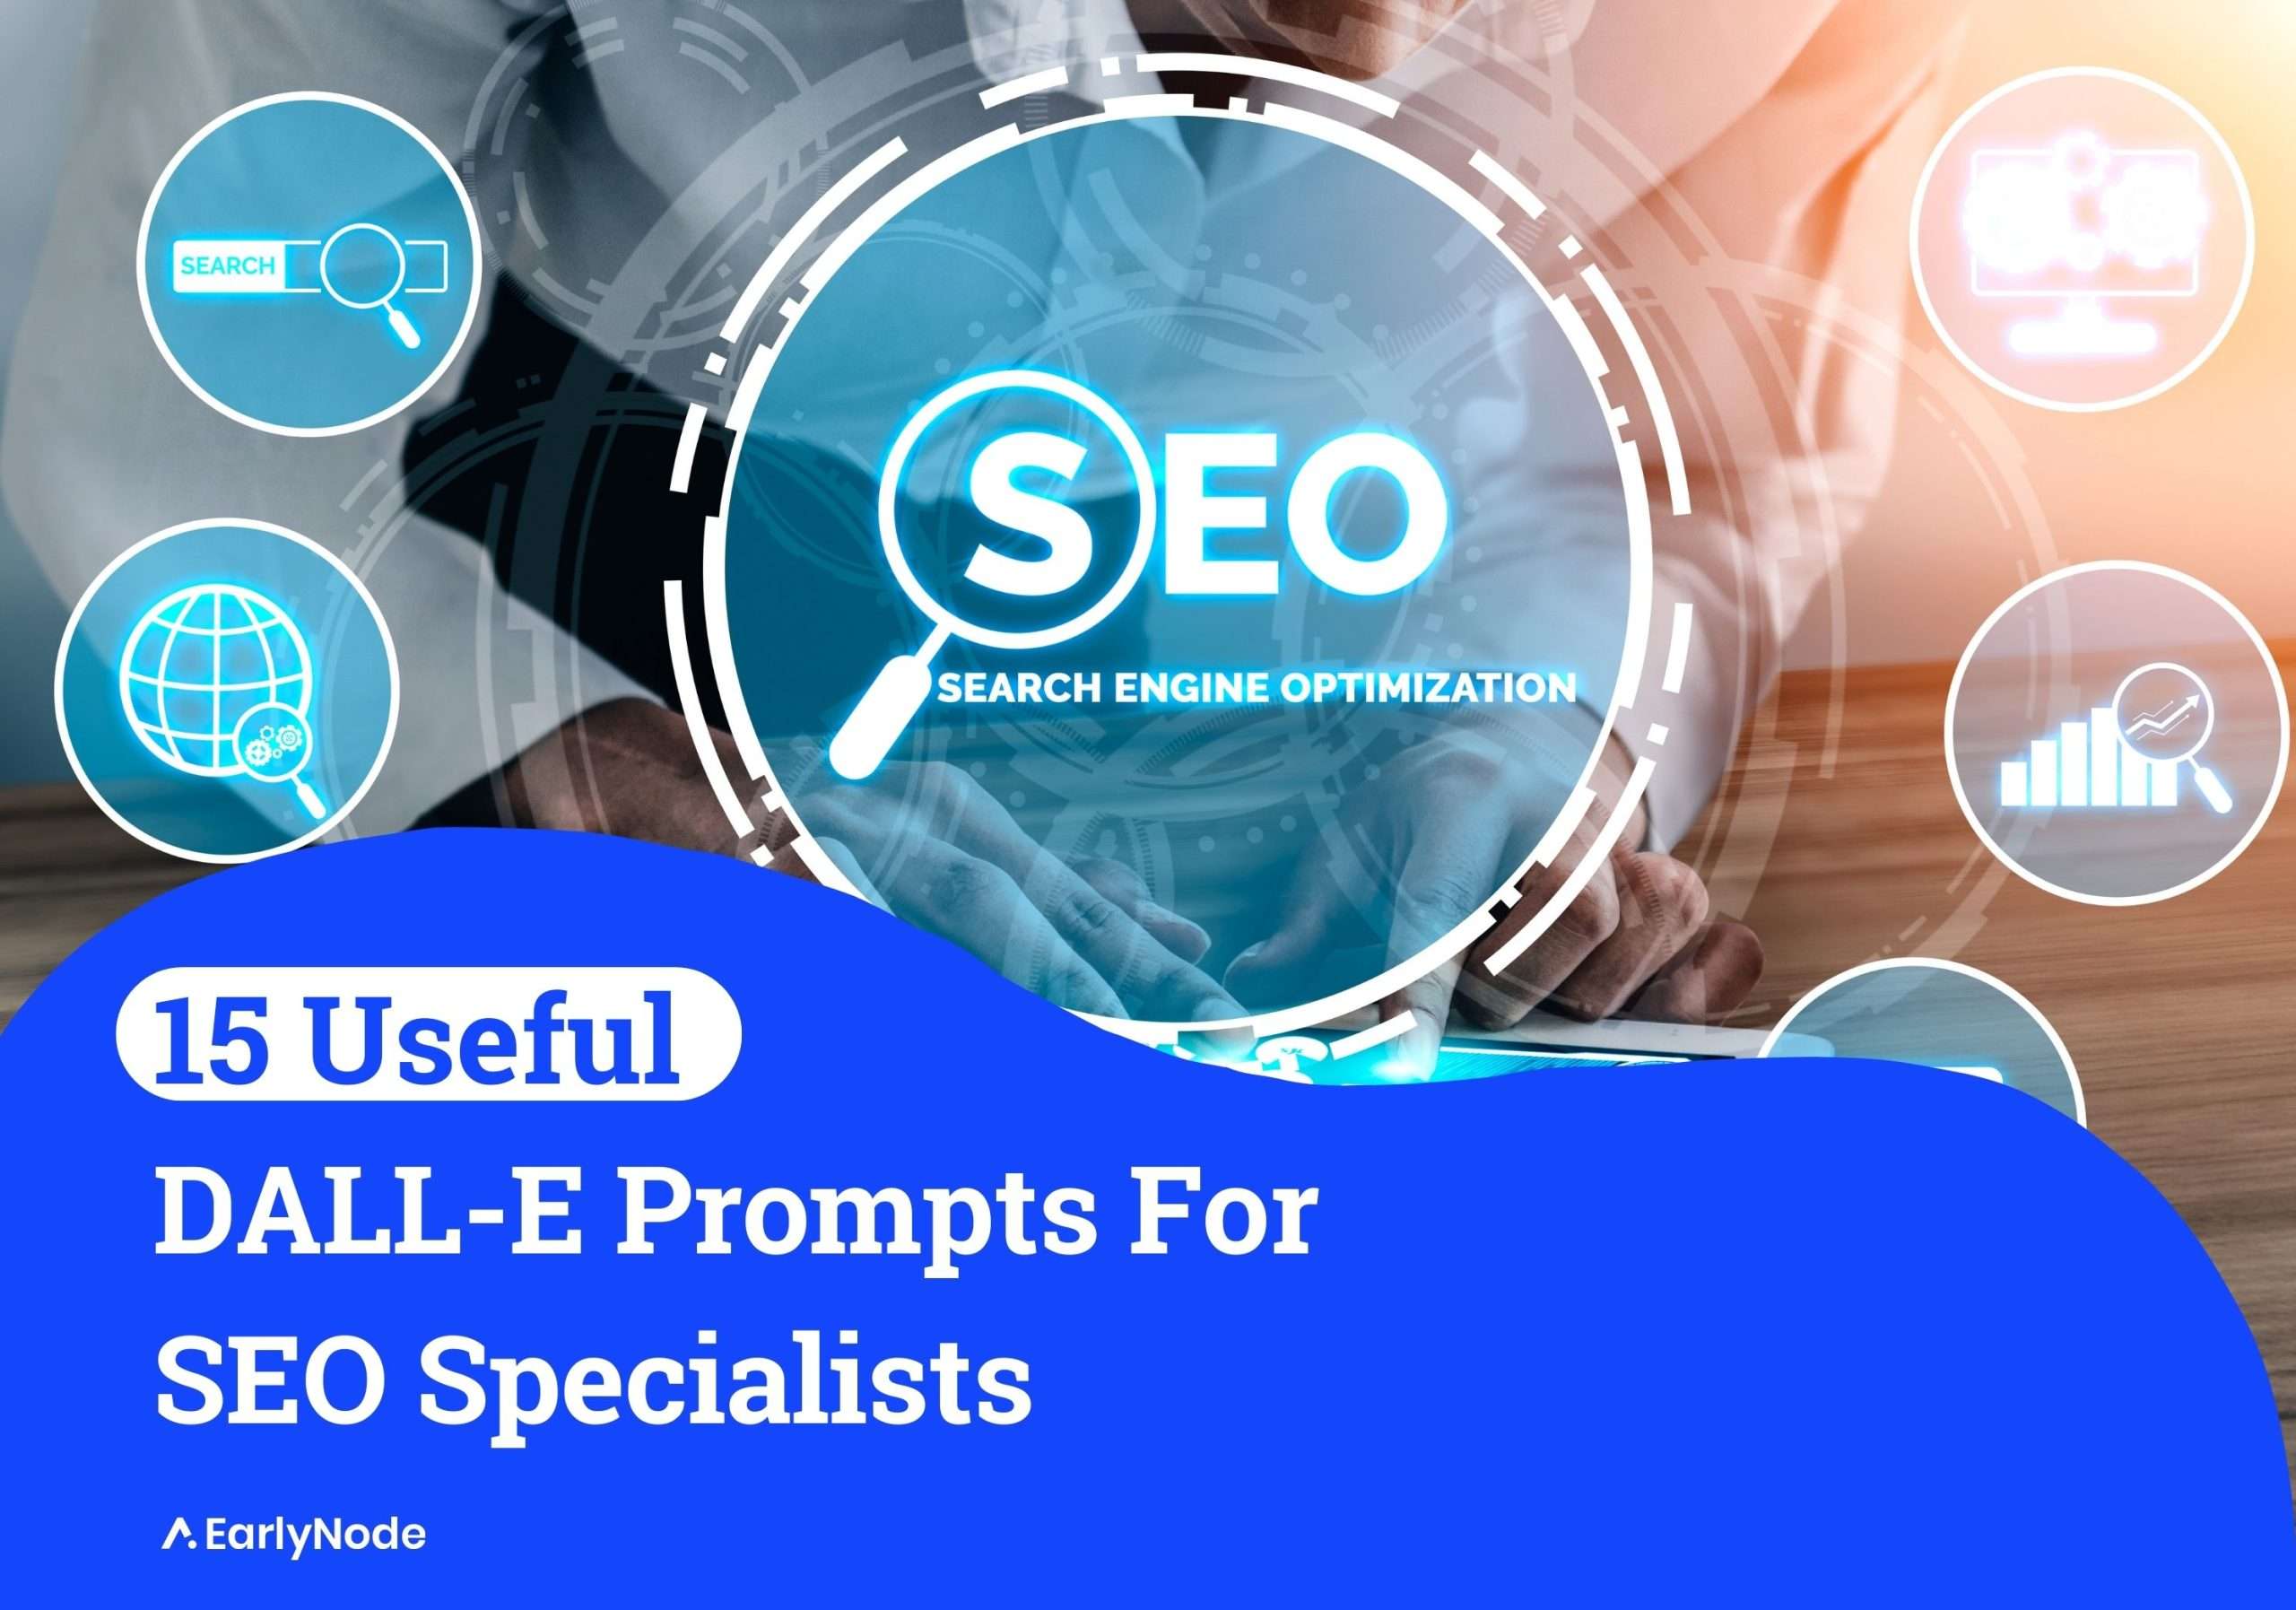 15+ Useful DALL-E Prompts for SEO Specialists